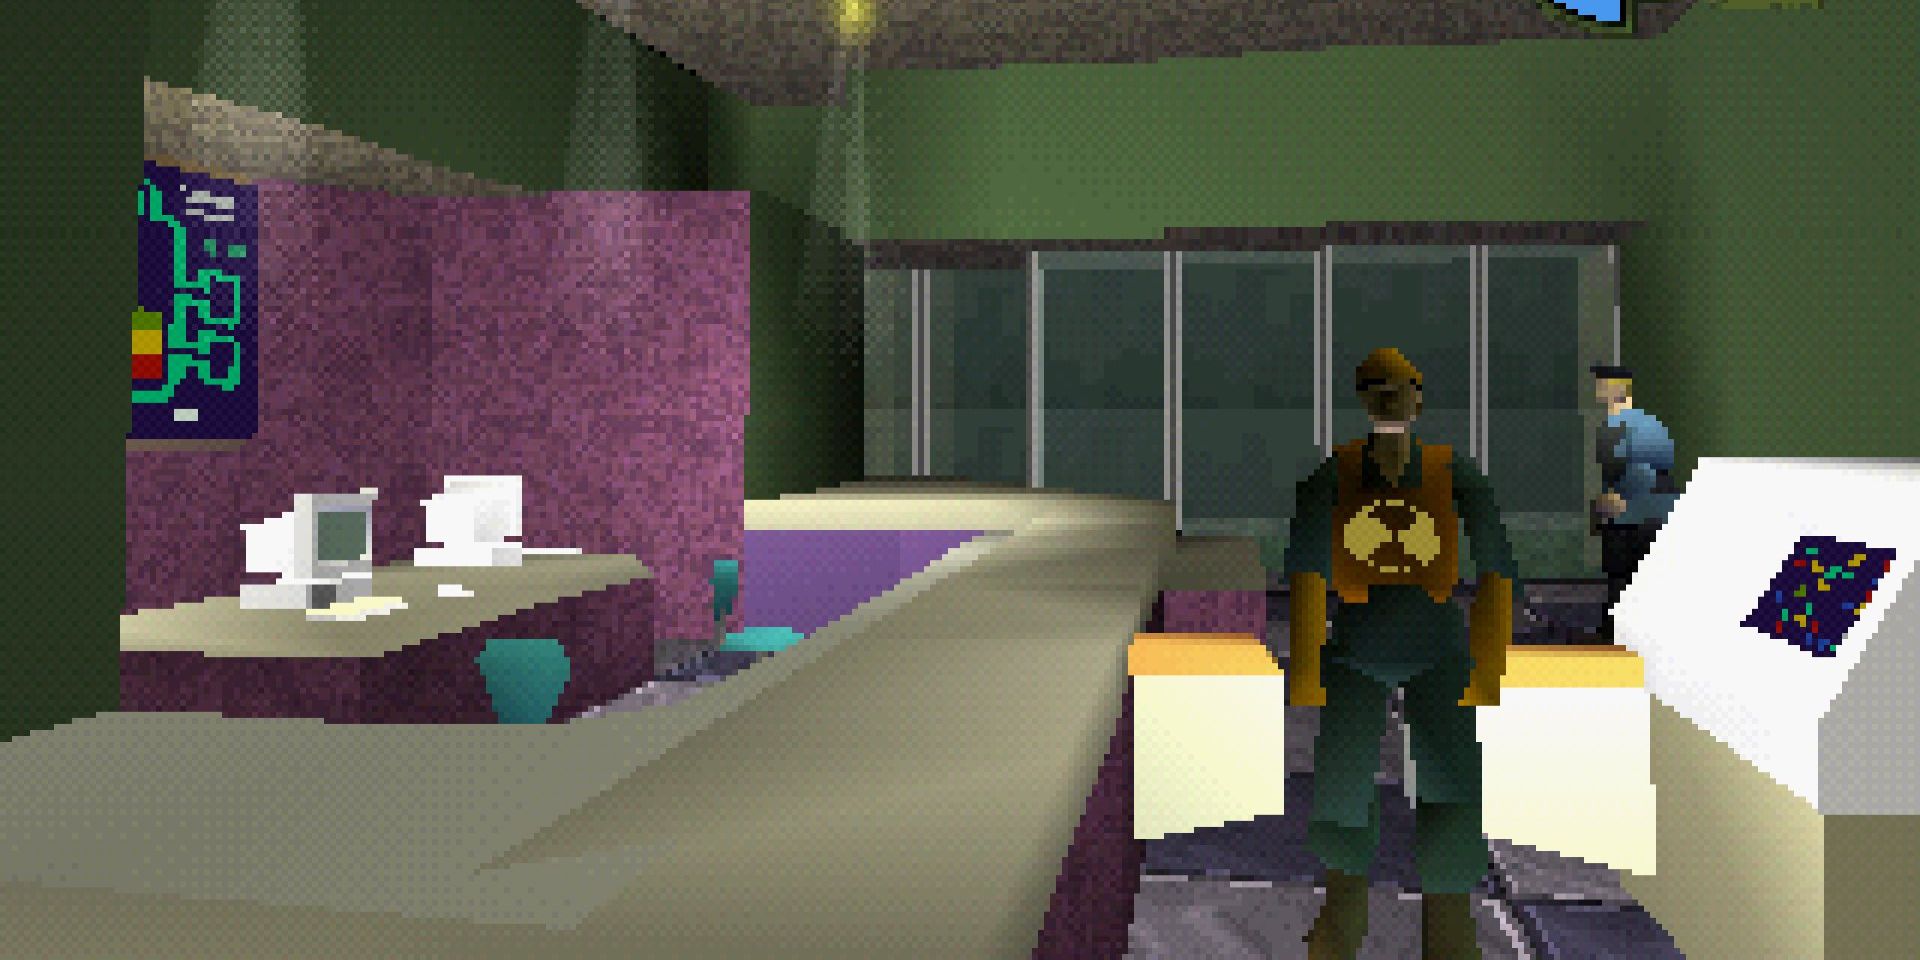 A soldier and a man stand in a building lobby in Germs: Nerawareta Machi.